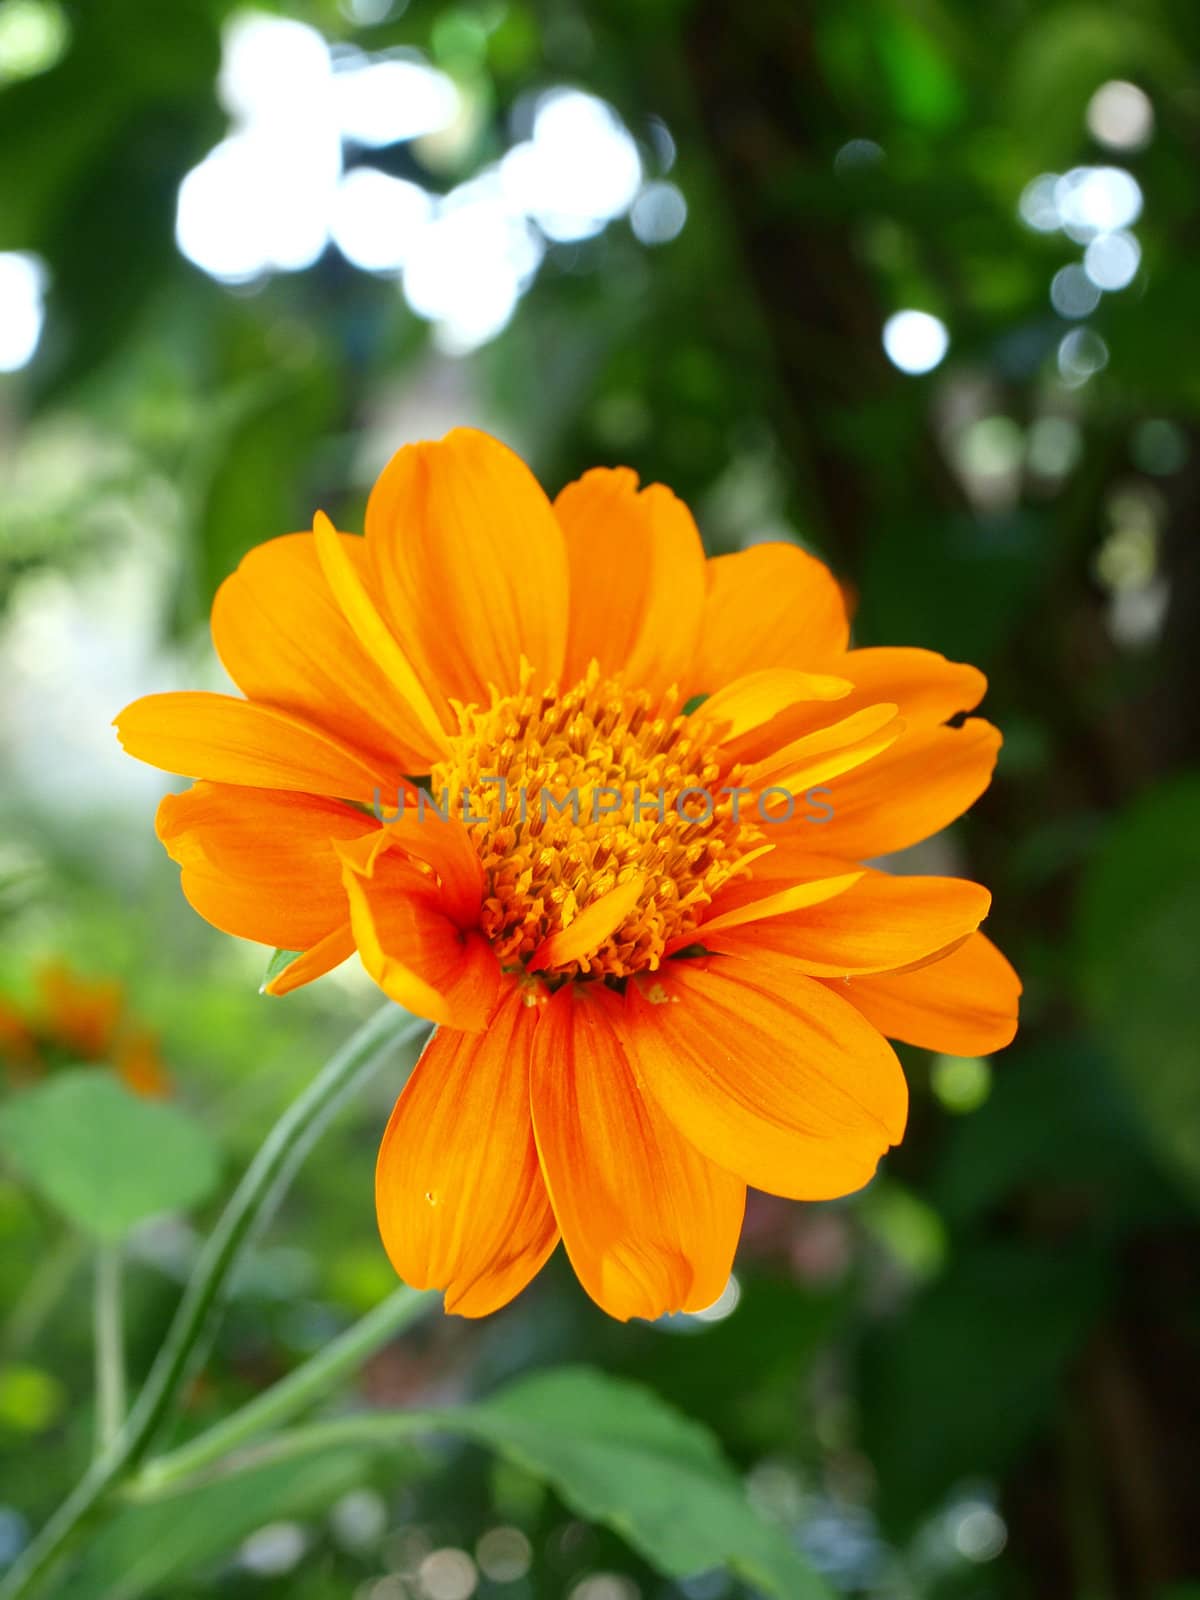 A close up of a Mexican Sunflower